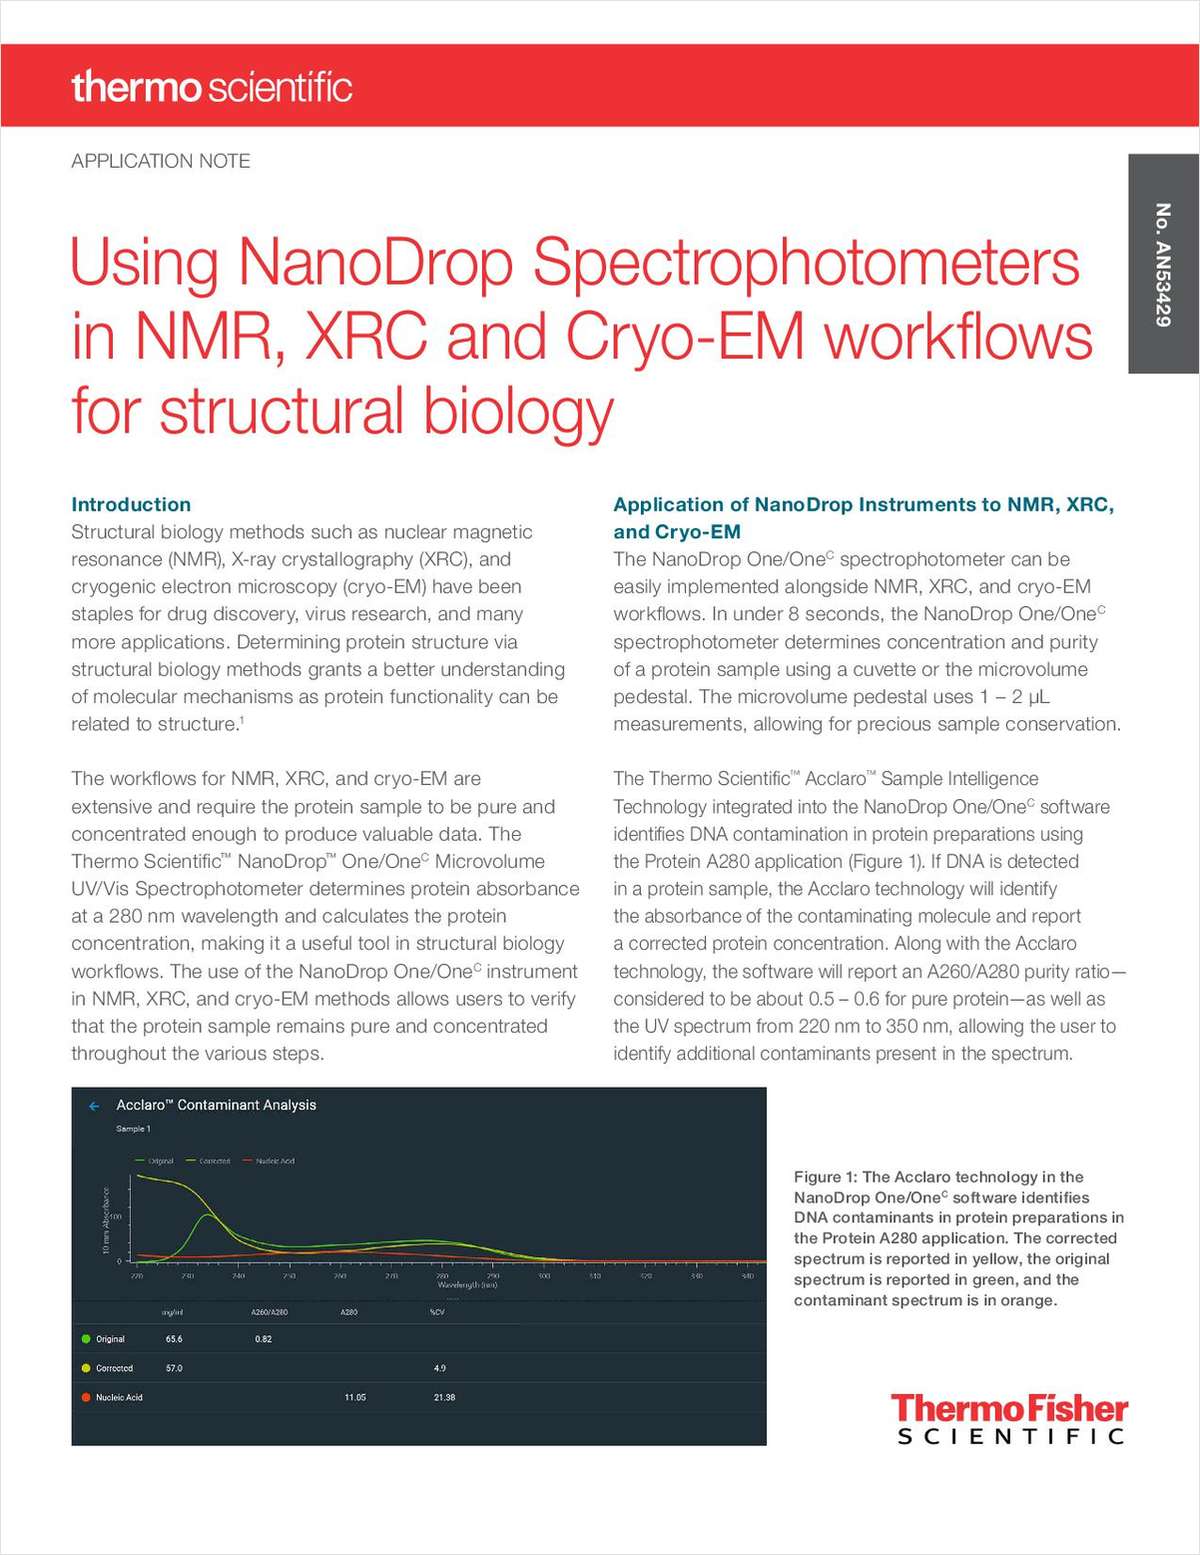 Using NanoDrop Spectrophotometers in NMR, XRC, and Cryo-EM Workflows for Structural Biology